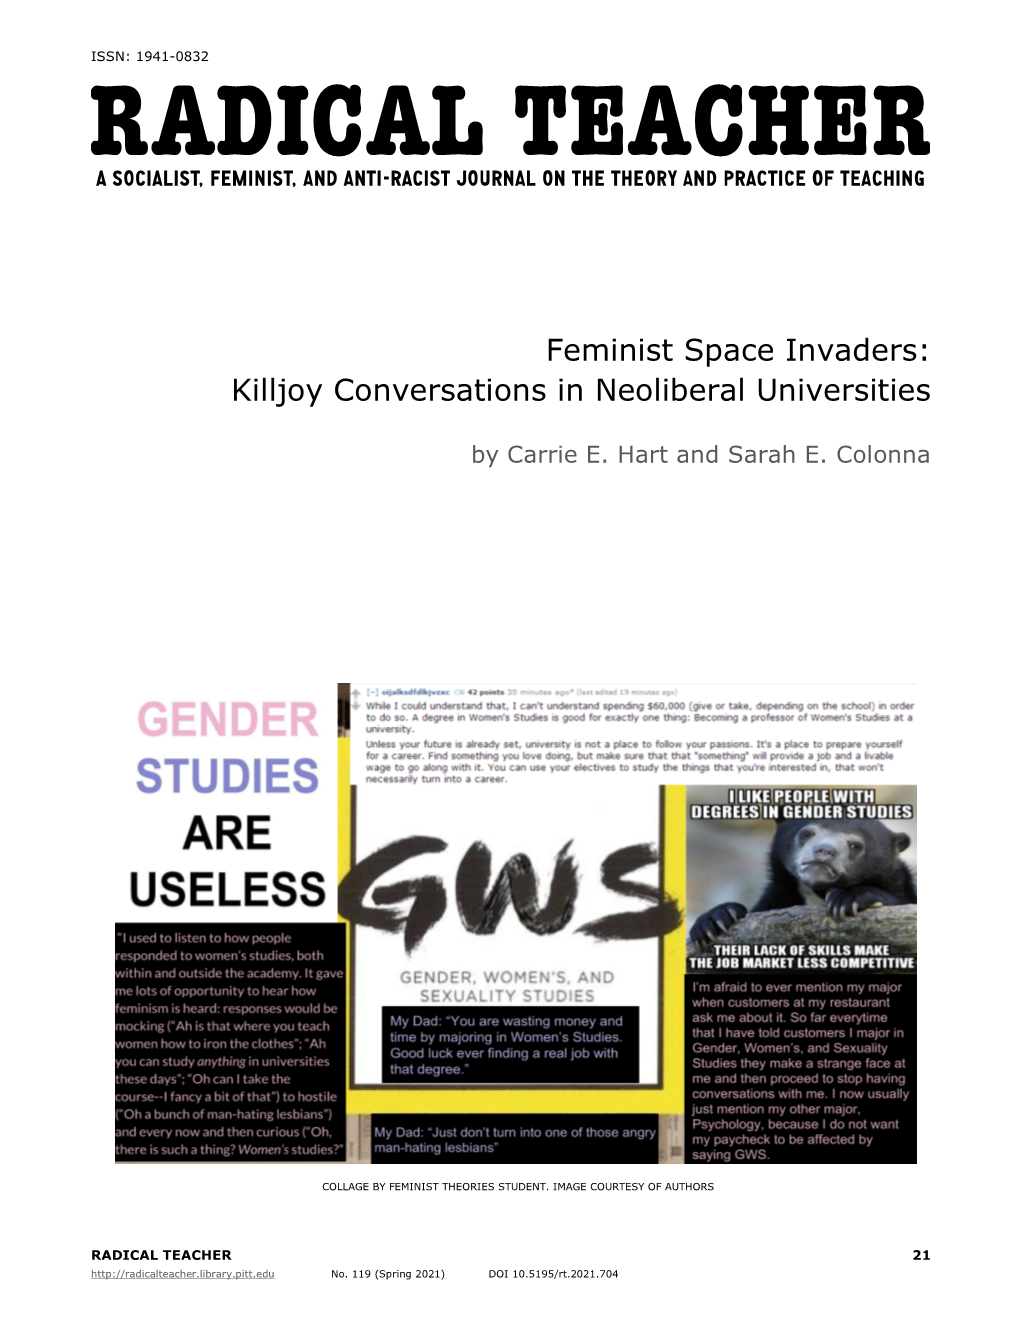 Feminist Space Invaders: Killjoy Conversations in Neoliberal Universities